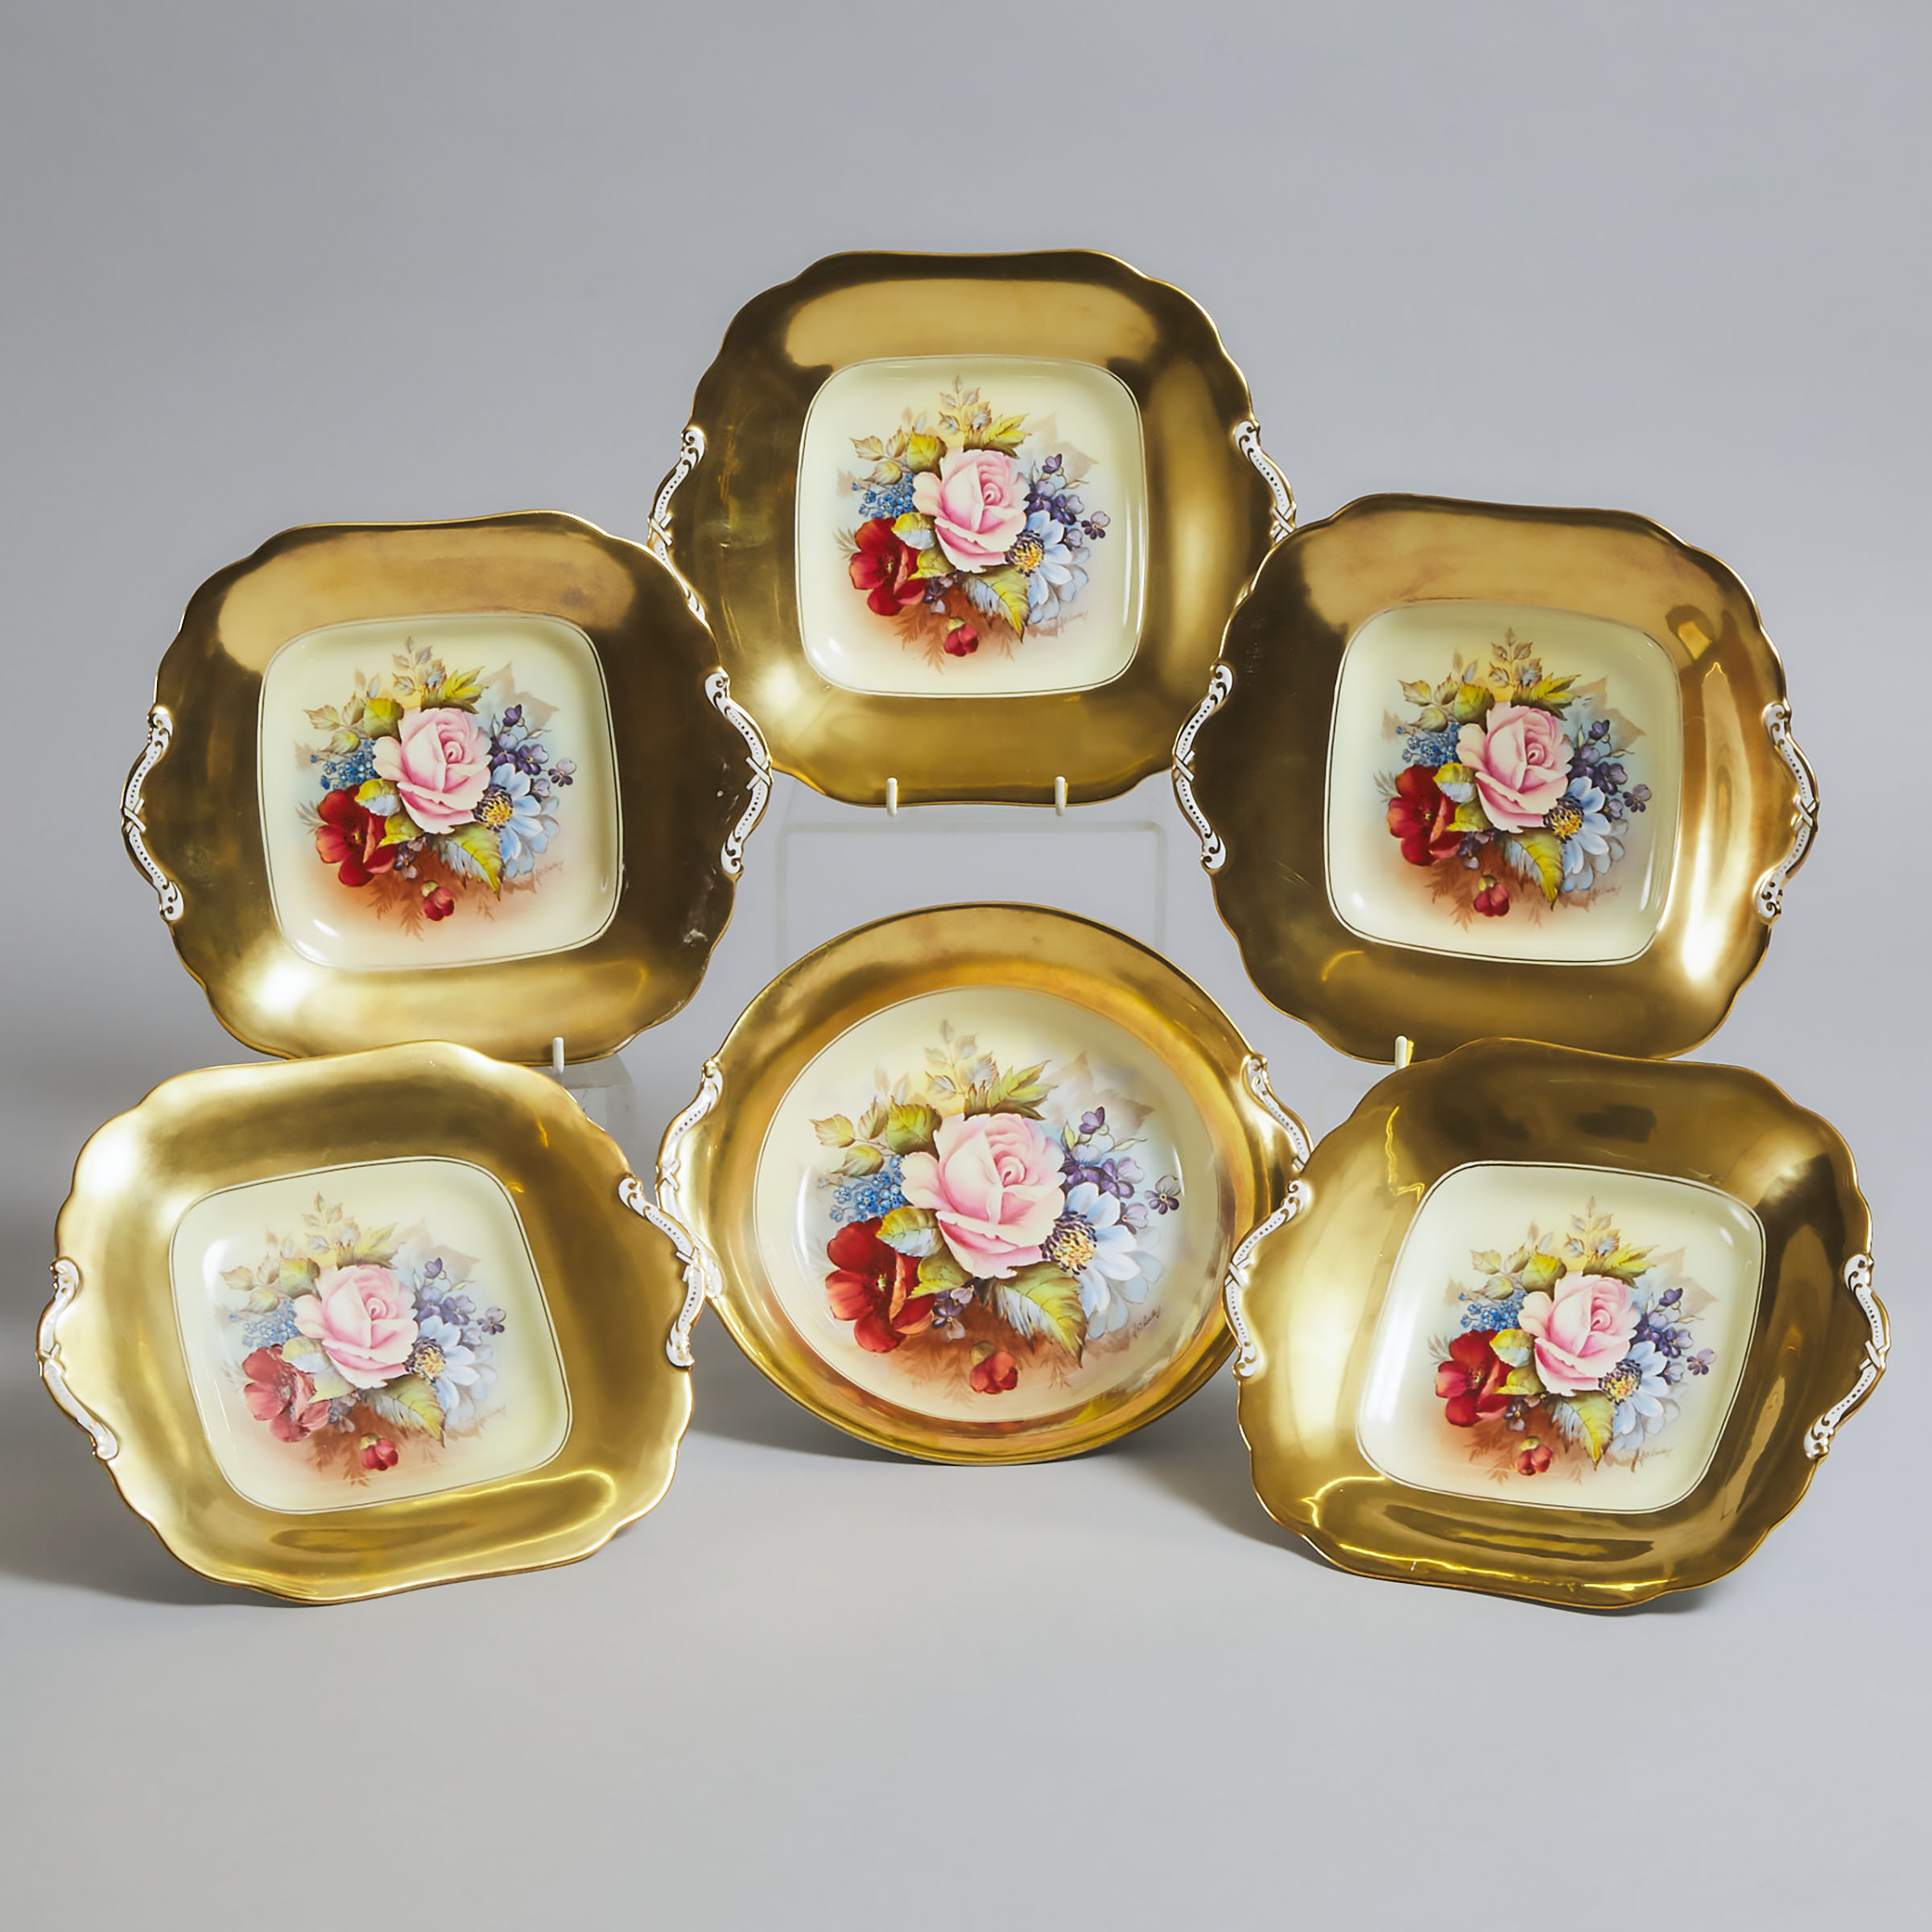 Five Aynsley 'Cabbage Rose' Square Cake Plates and a Circular Bowl, J.A. Bailey, 20th century